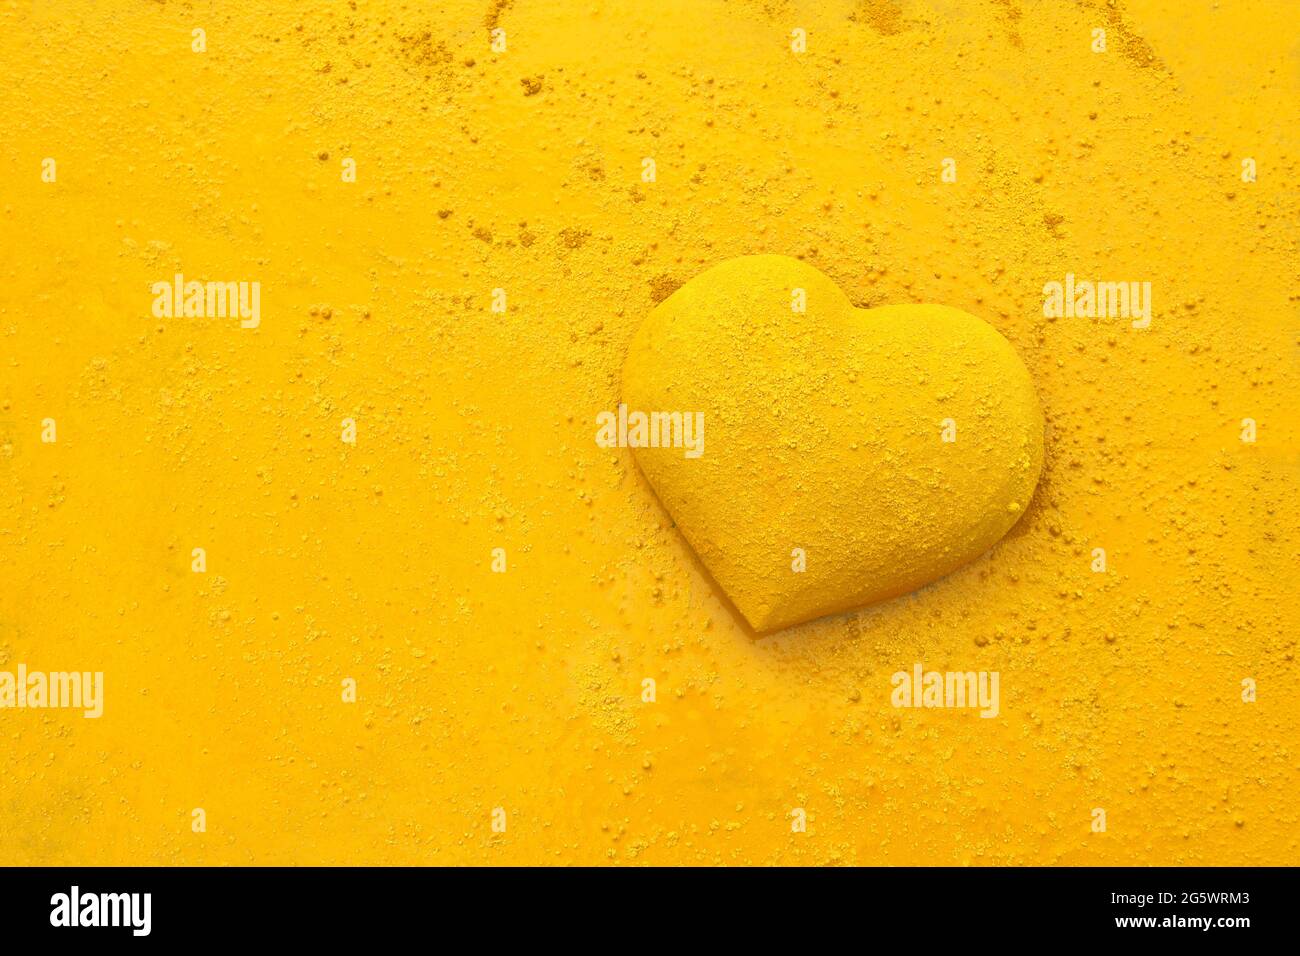 3 dimensional heart shape splattered by yellow paint, and sprinkled with dry pigment.   The paint used is Gerstaecker Creativ Pigmente (Gerstaecker Cr Stock Photo